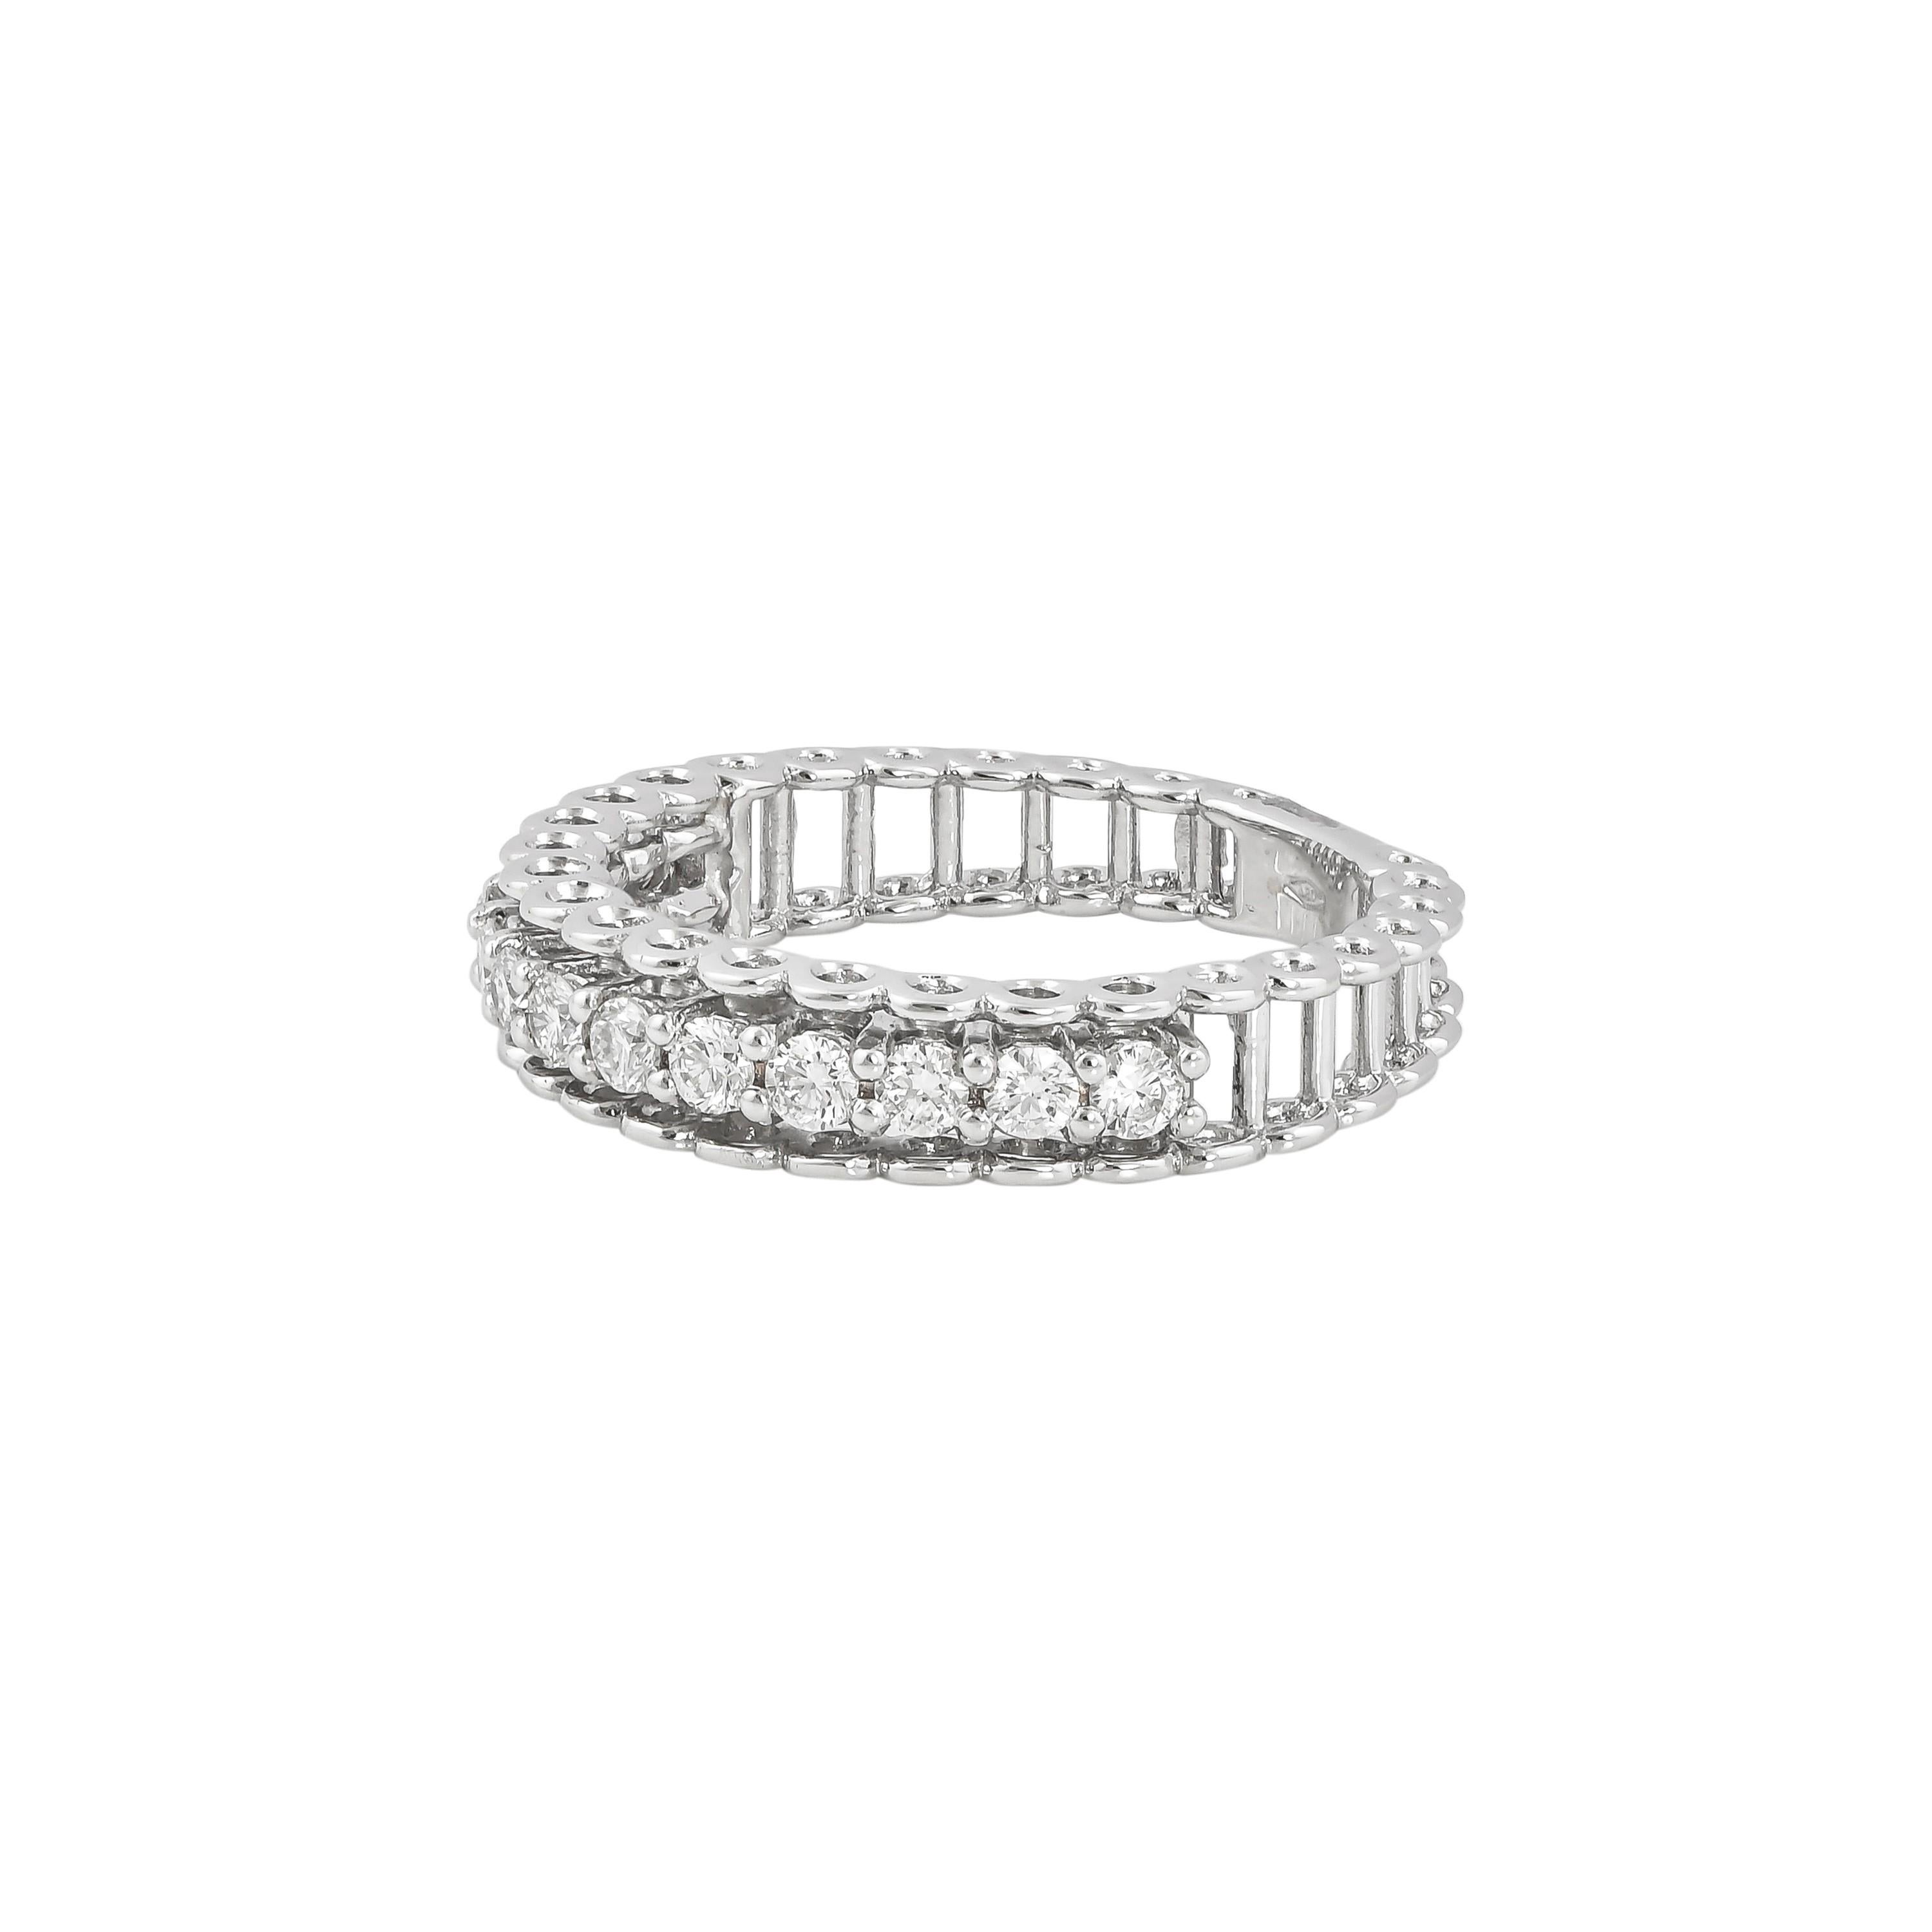 Contemporary 0.541 Carat GVS Diamond Band Ring in 18 Karat White Gold For Sale